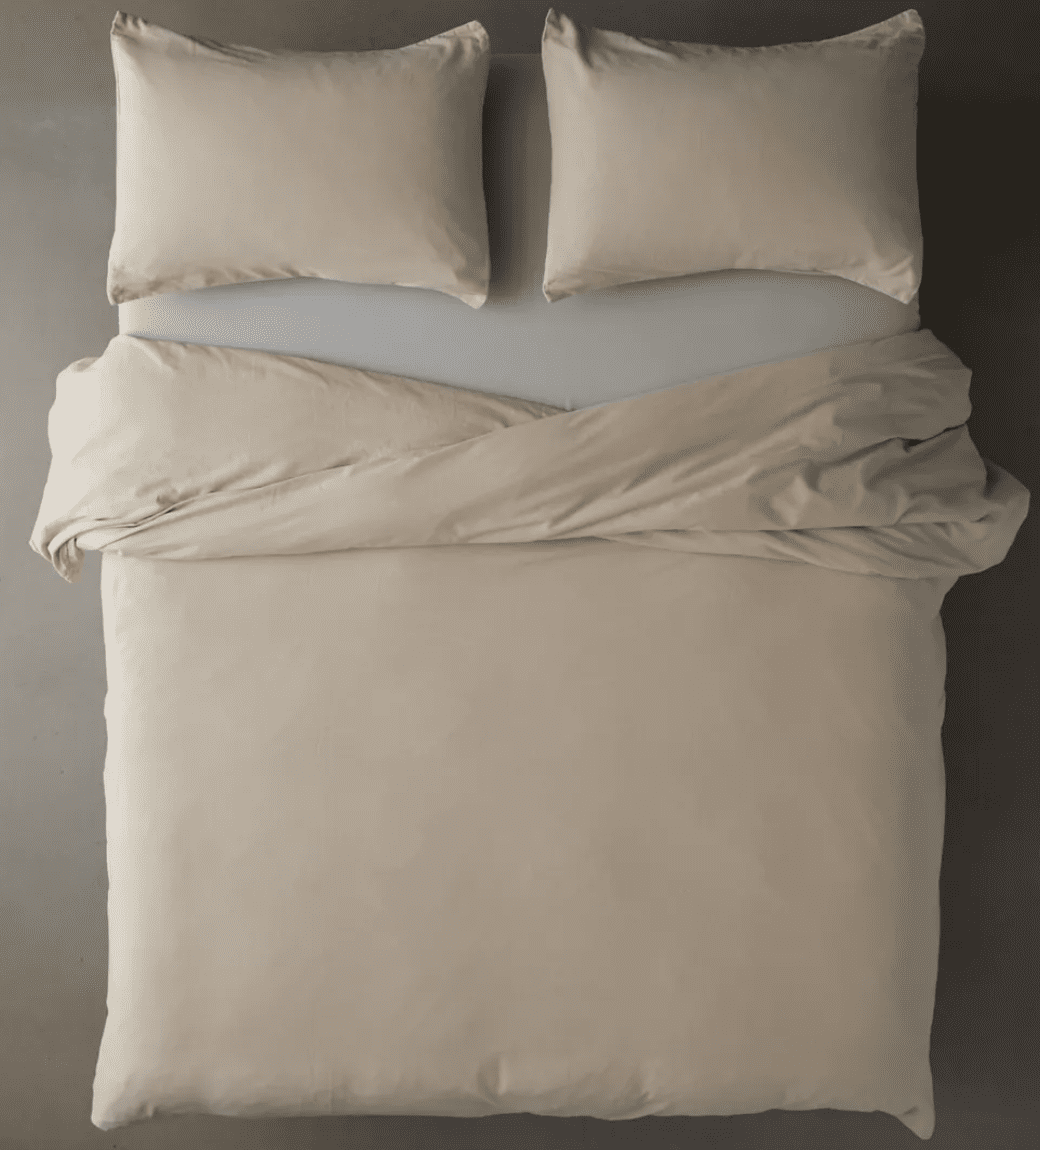 https://cdn.apartmenttherapy.info/image/upload/v1692640489/gen-workflow/product-database/Urban-Outfitters-Relaxed-Linen-Duvet-Set.png